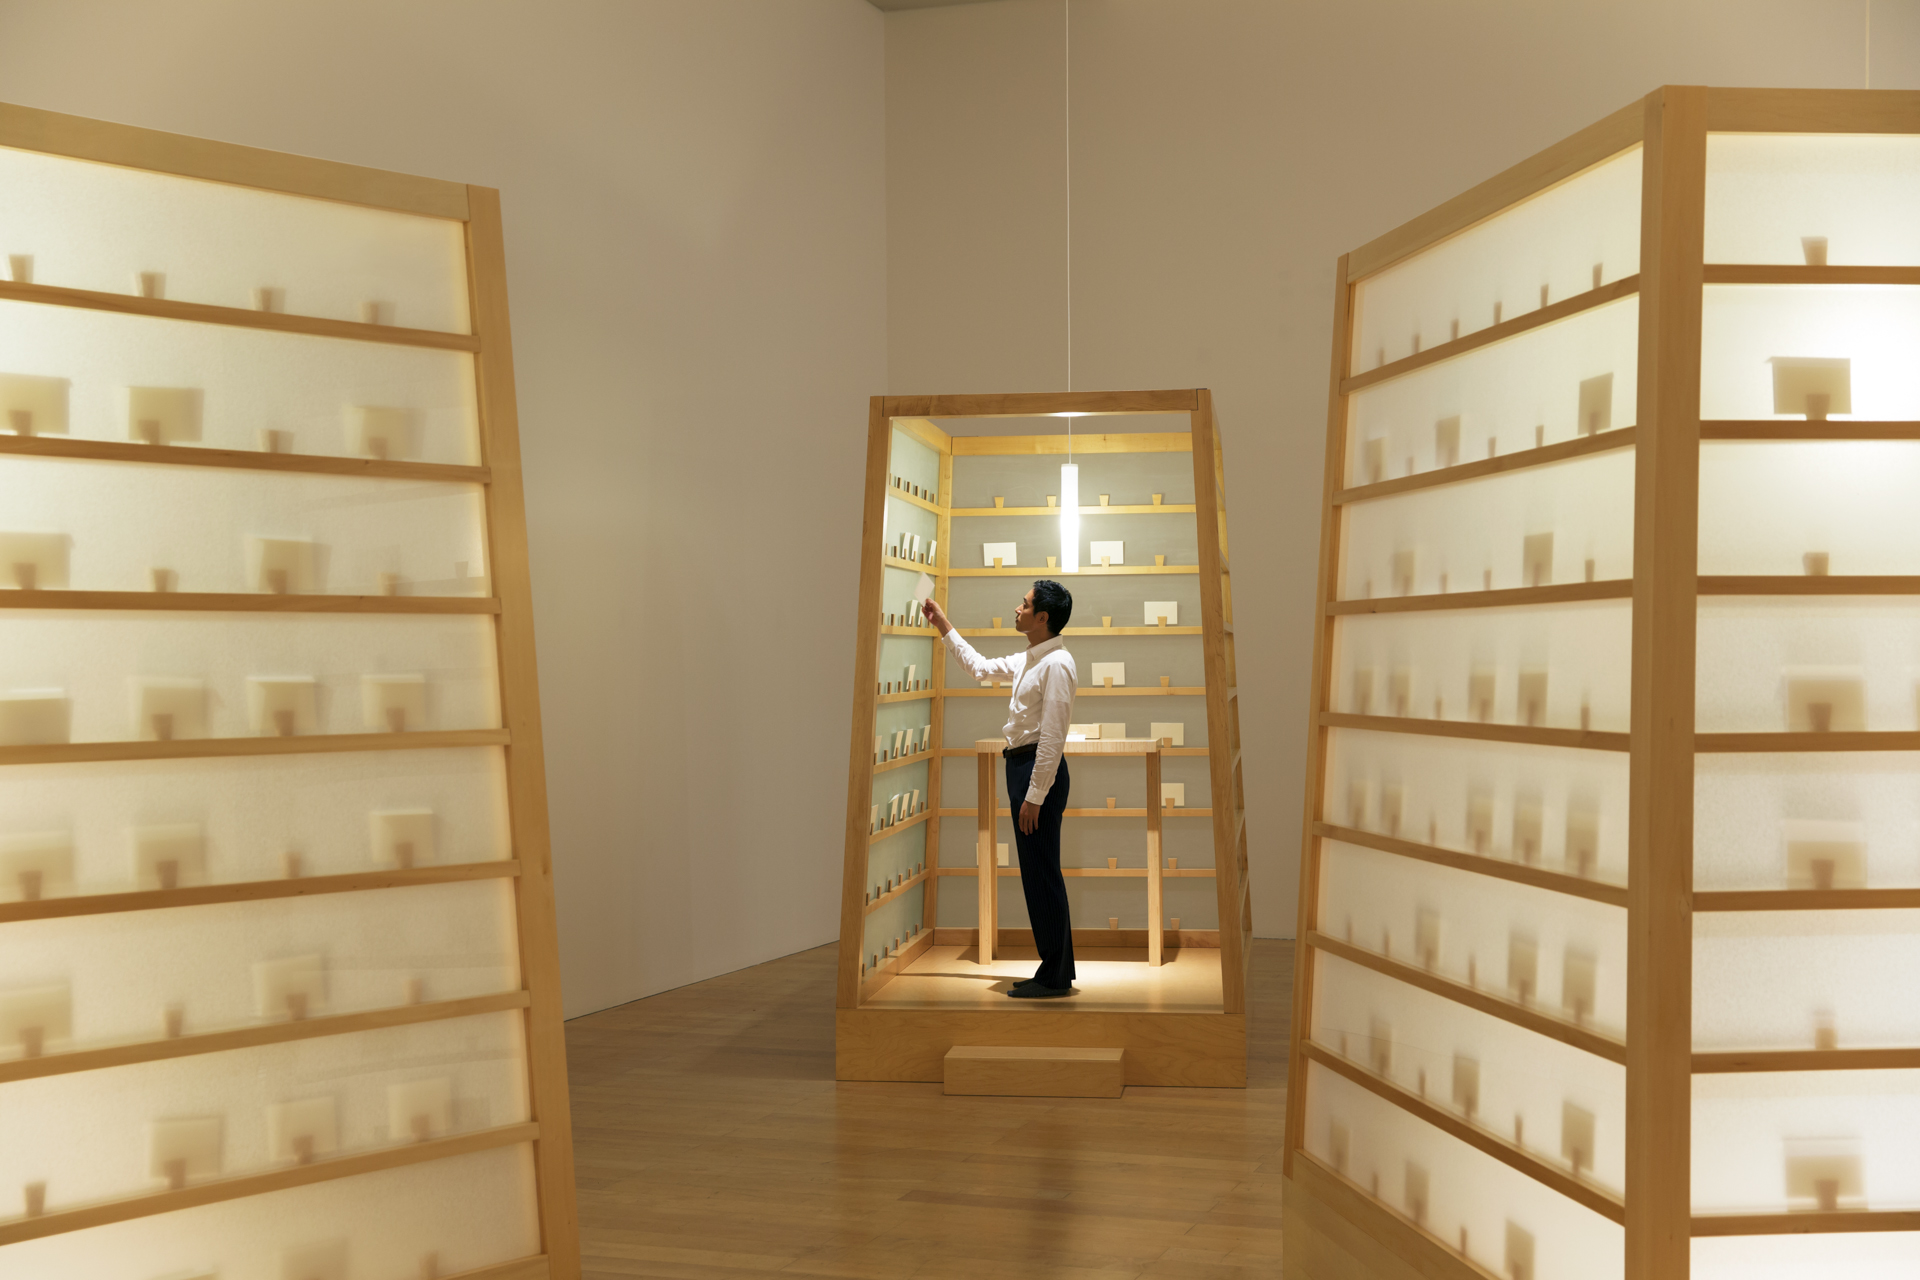 A person stands inside a lit, box-like wooden shelf structure, reaching out to a small object amidst many similar objects on shelves.